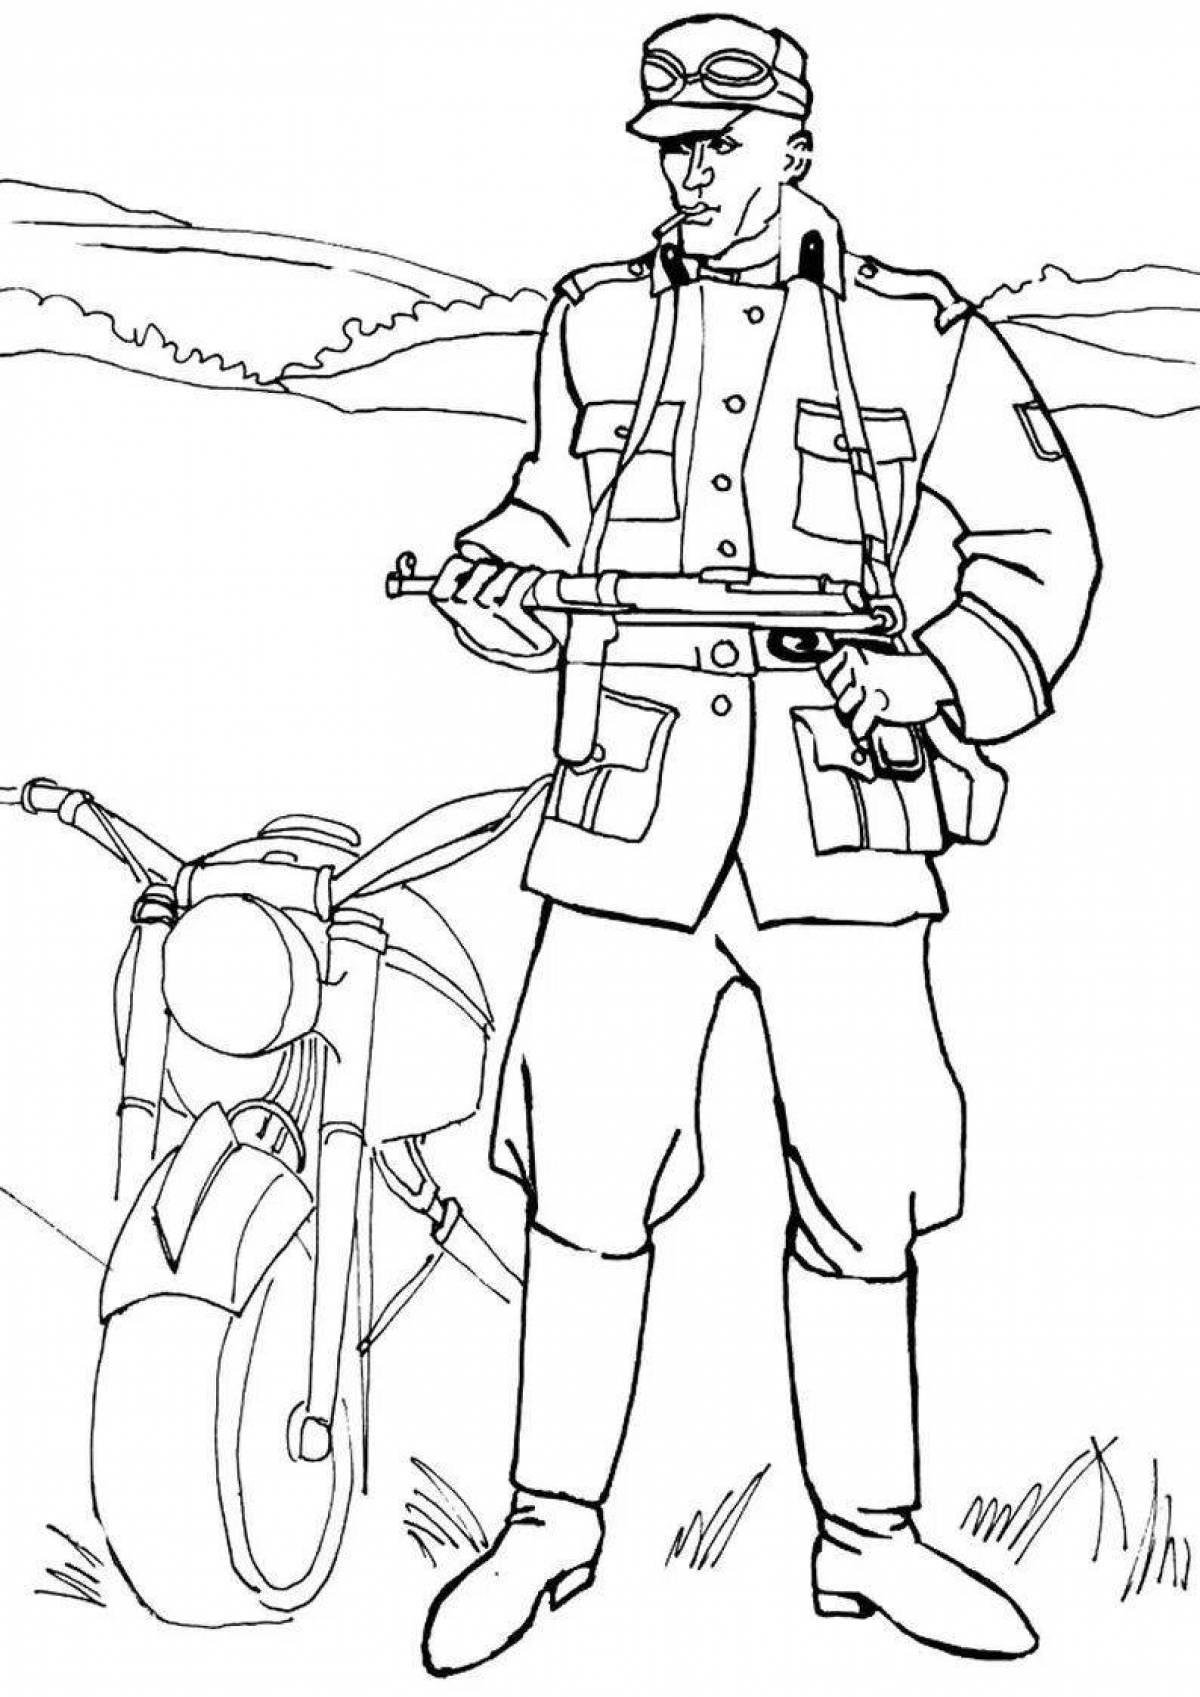 Coloring dashing soldier of the ussr